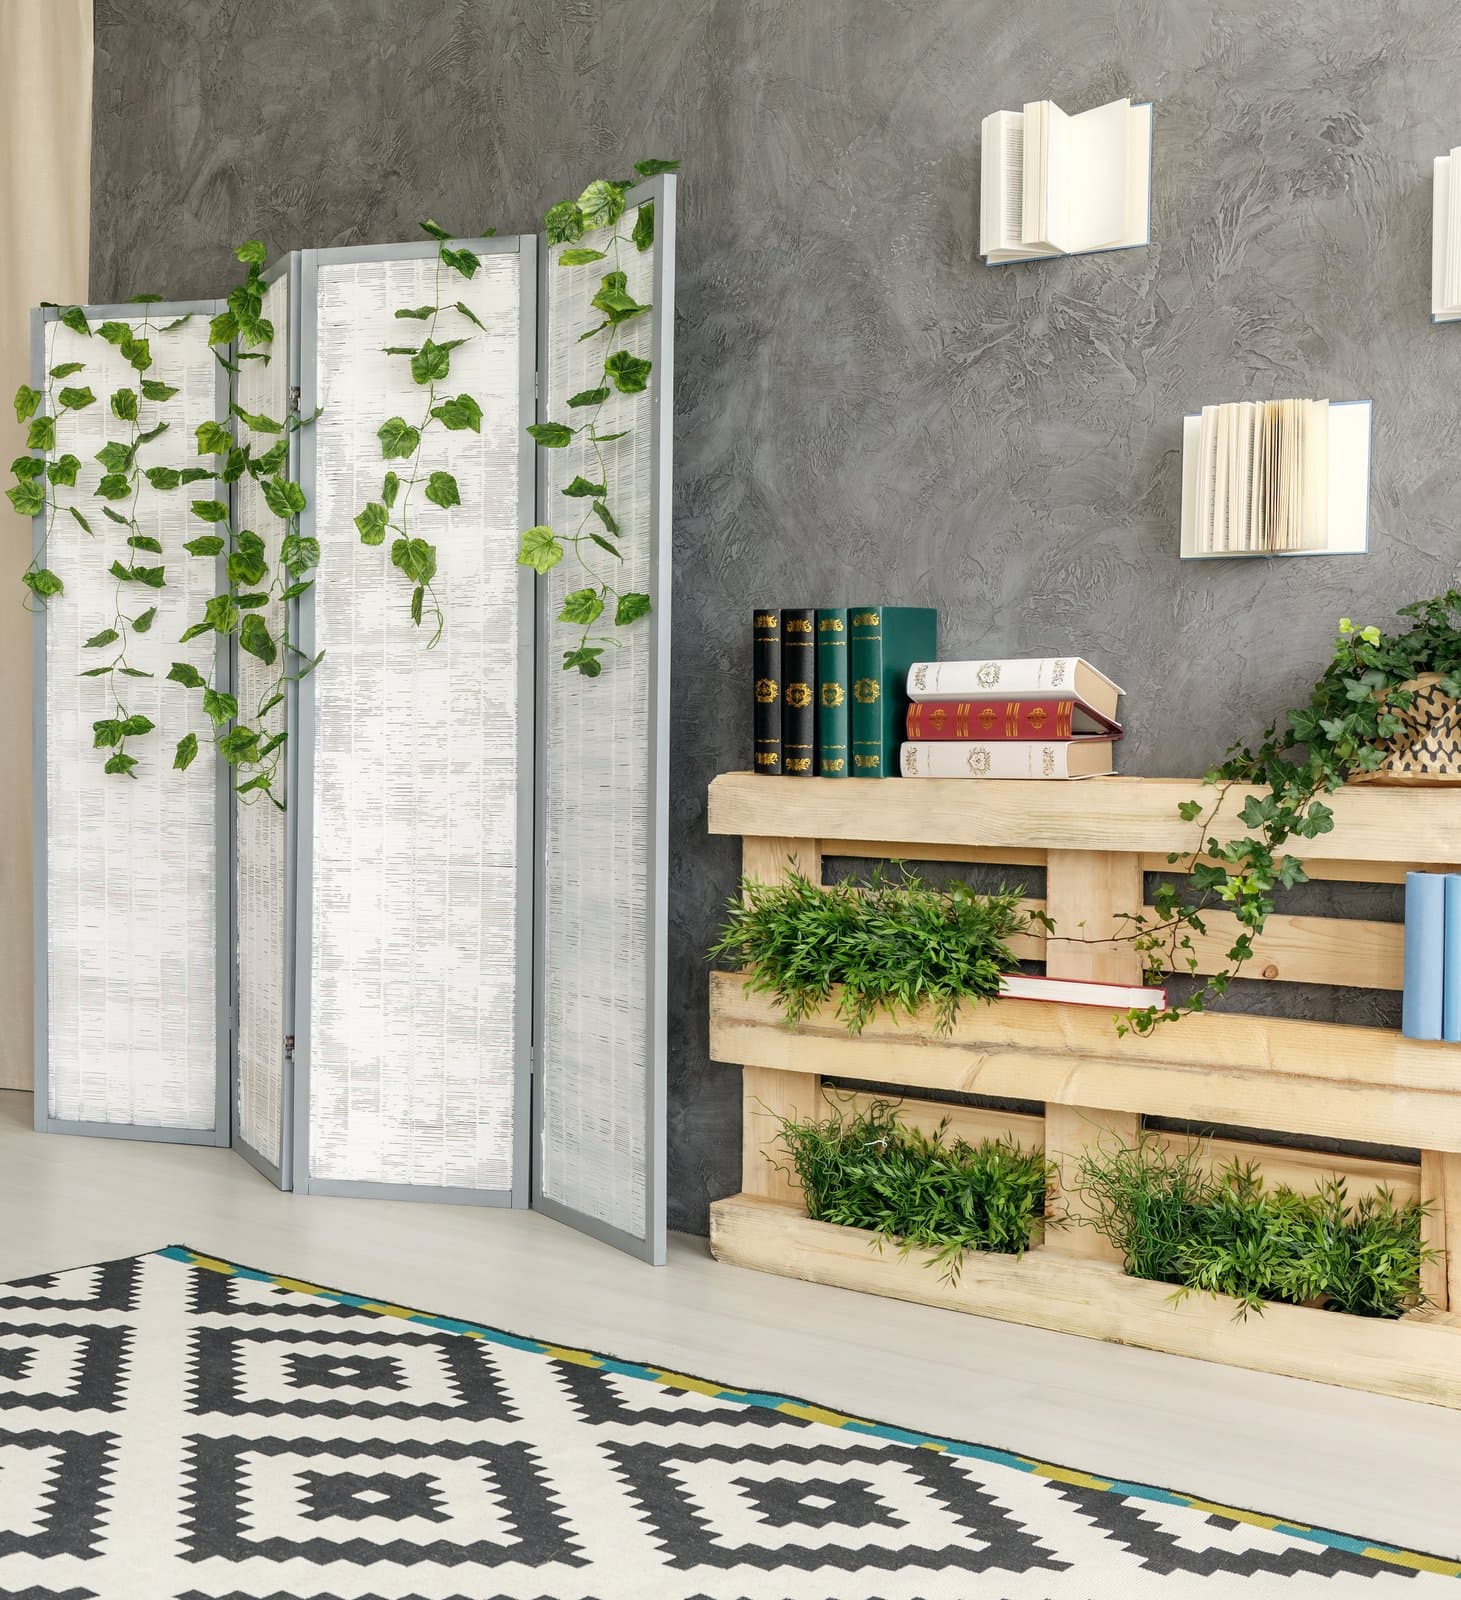 Indoor plants decorating: Green plants built into a bookshelf and ivy hanging from a divider